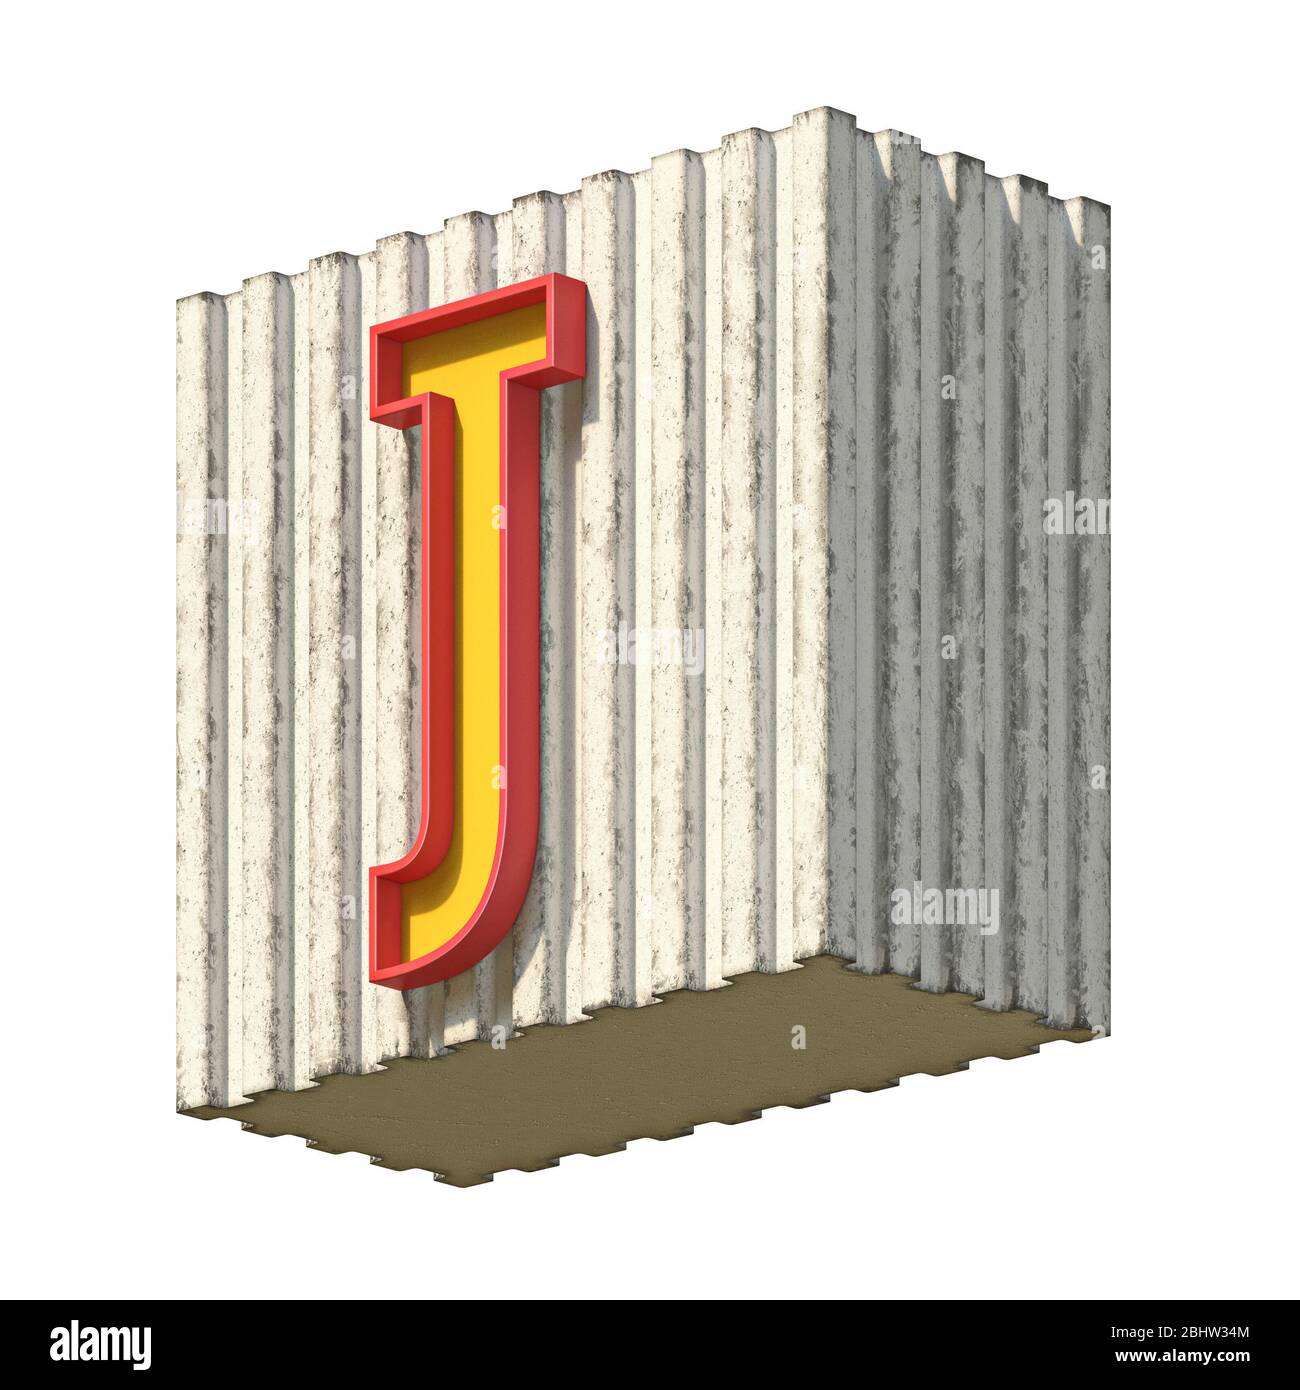 Vintage concrete red yellow font Letter J 3D render illustration isolated on white background Stock Photo